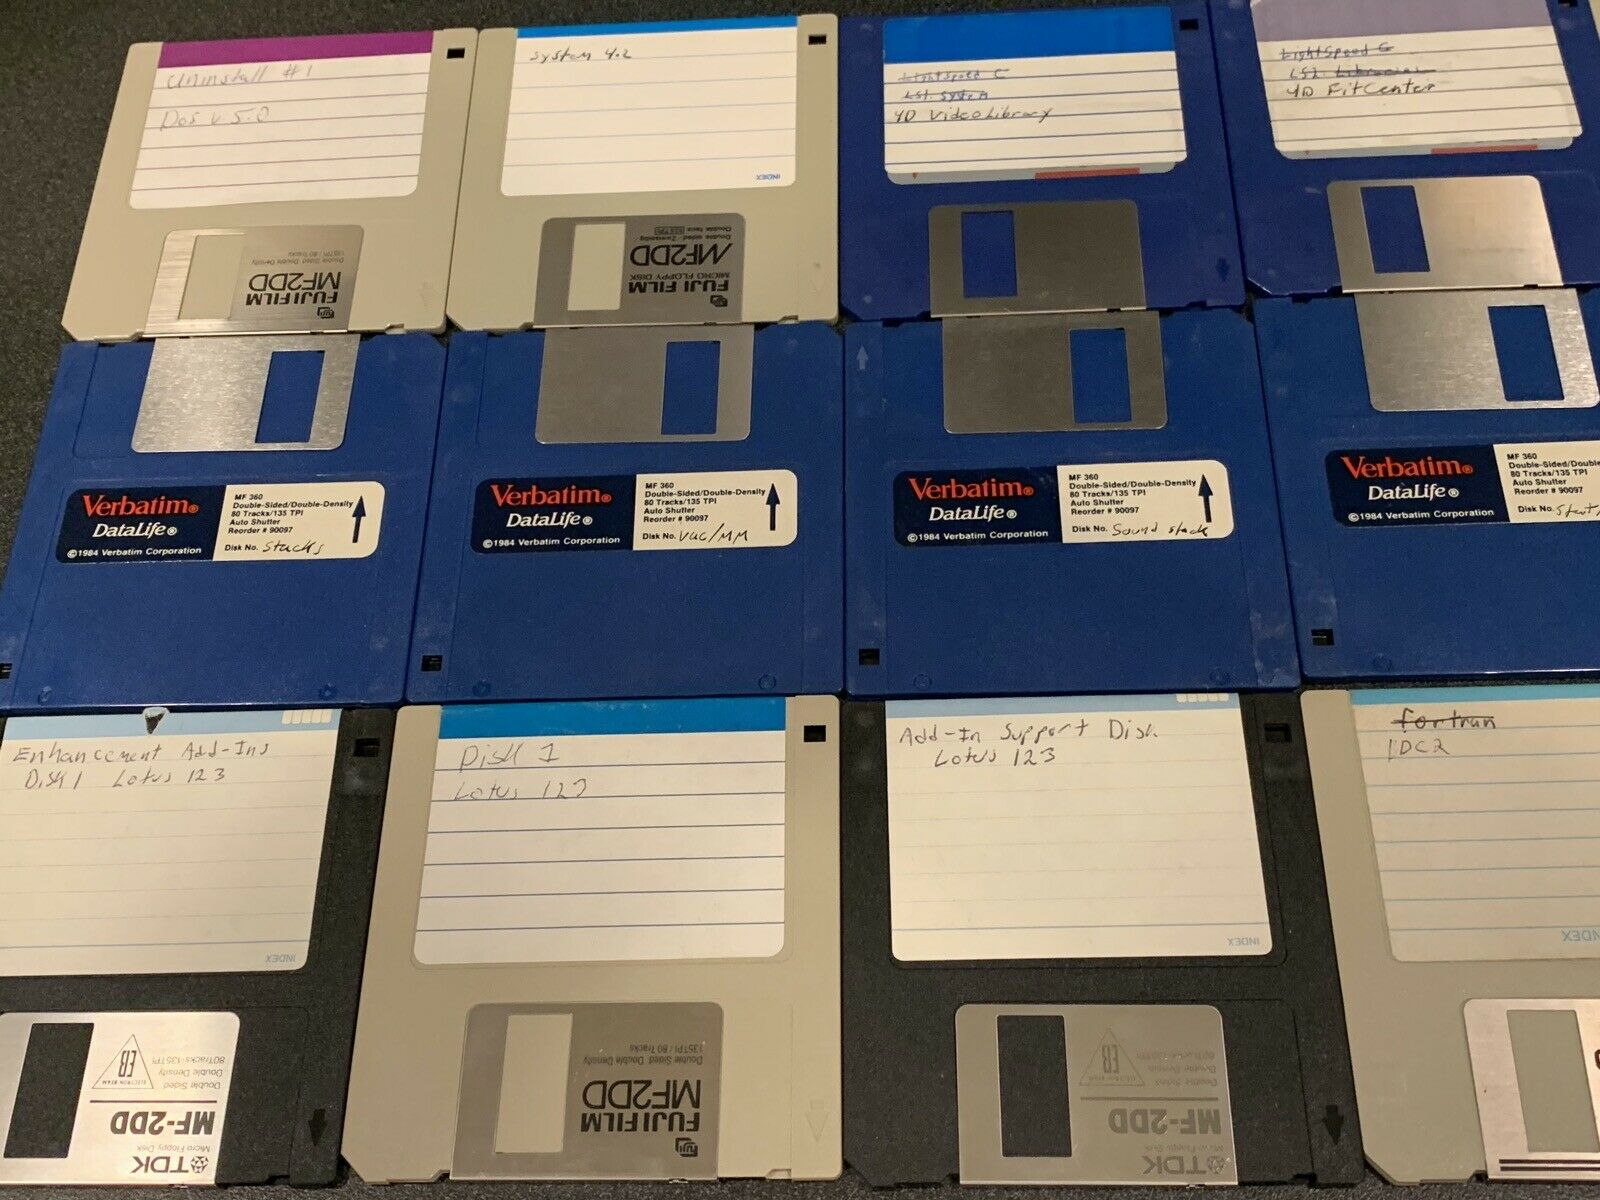 16 Used 3.5” Floppy Disks Macintosh (and Maybe Pc) Vintage Computer